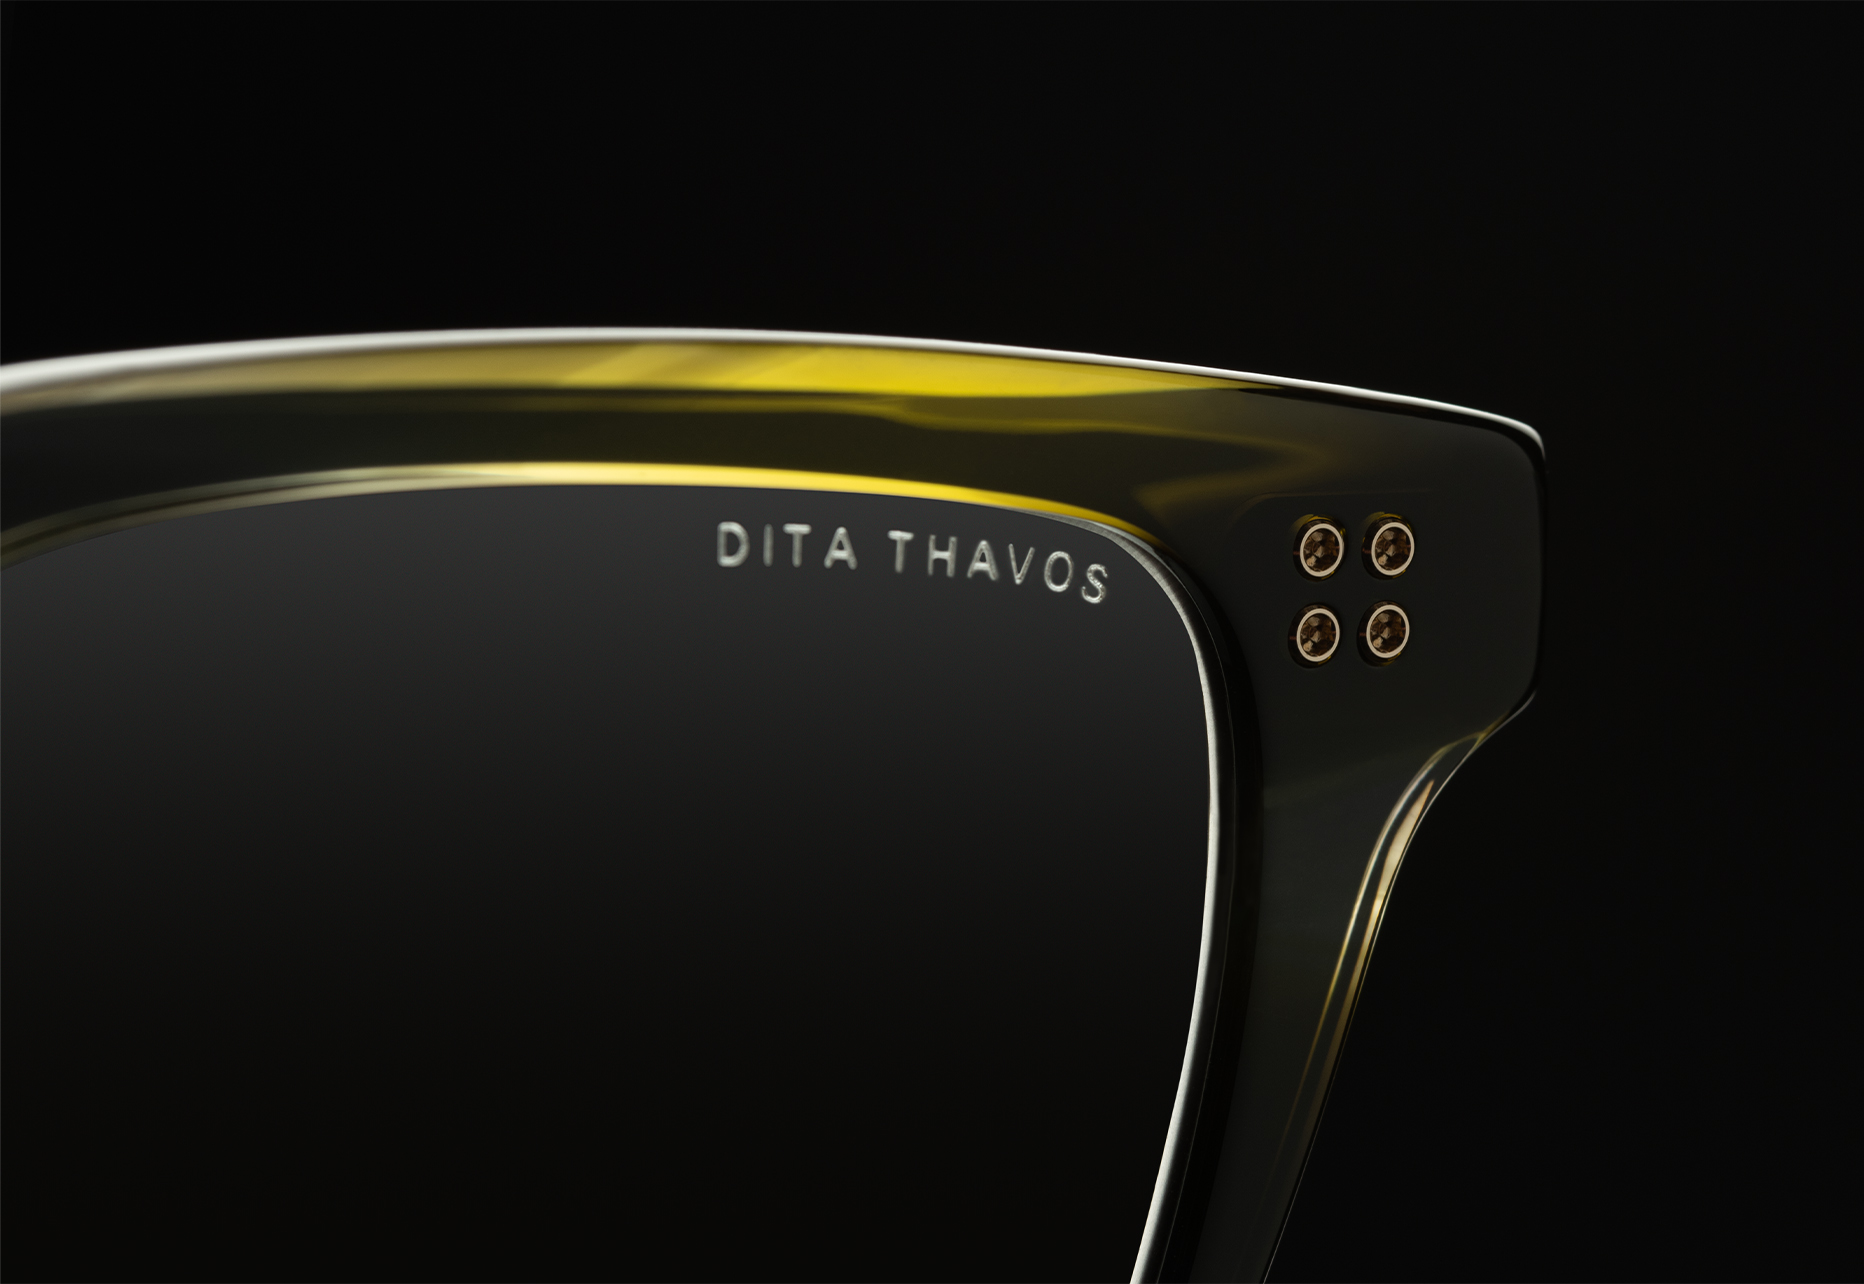 DITA THAVOS OPTICAL 100% UVA AND UVB LENS WITH ANTI-REFLECTIVE COATING  